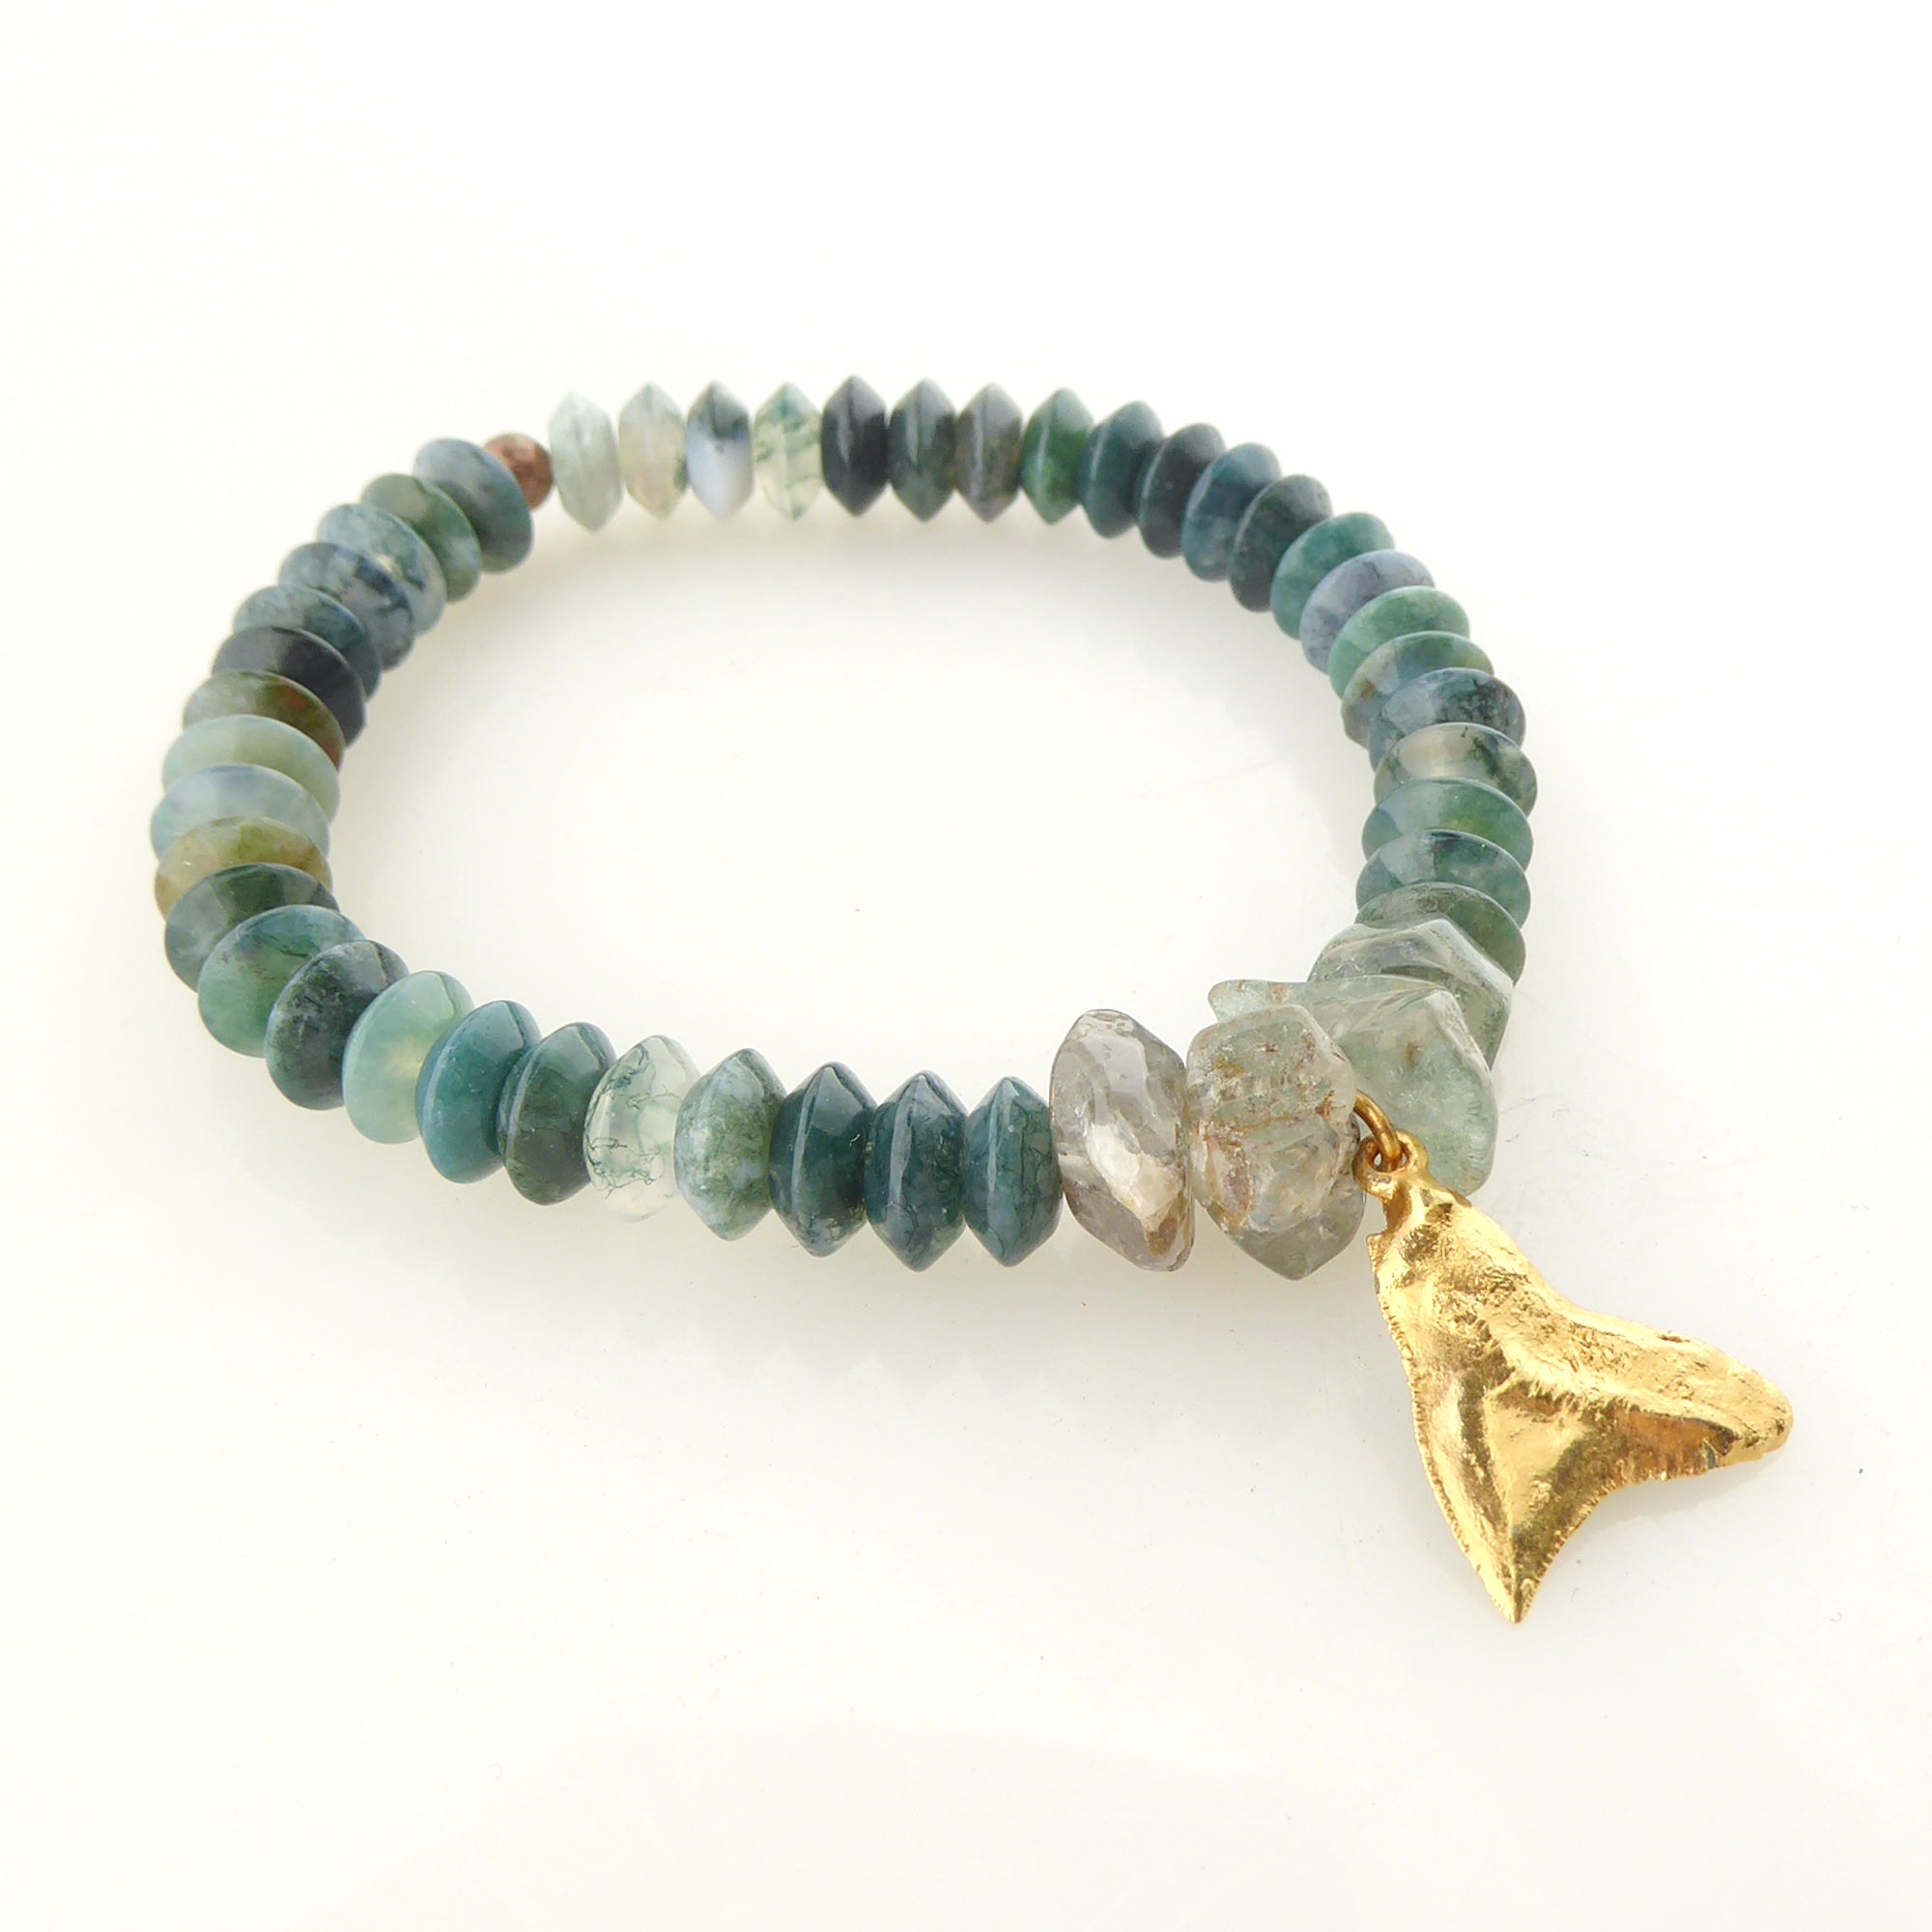 Moss agate and shark tooth bracelet by Jenny Dayco 2